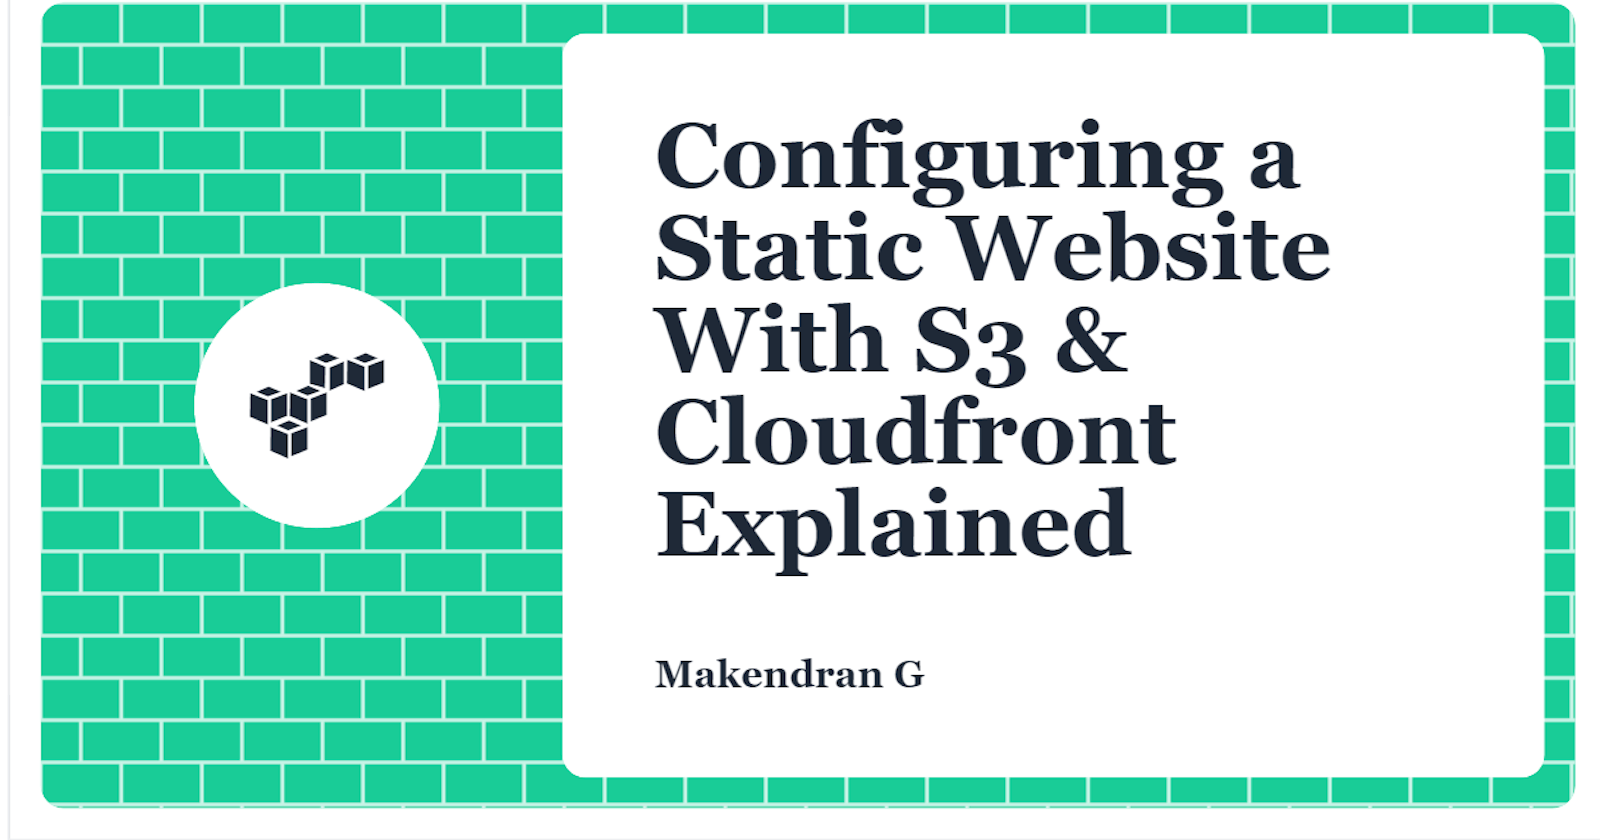 Configuring a Static Website With S3 & Cloudfront Explained